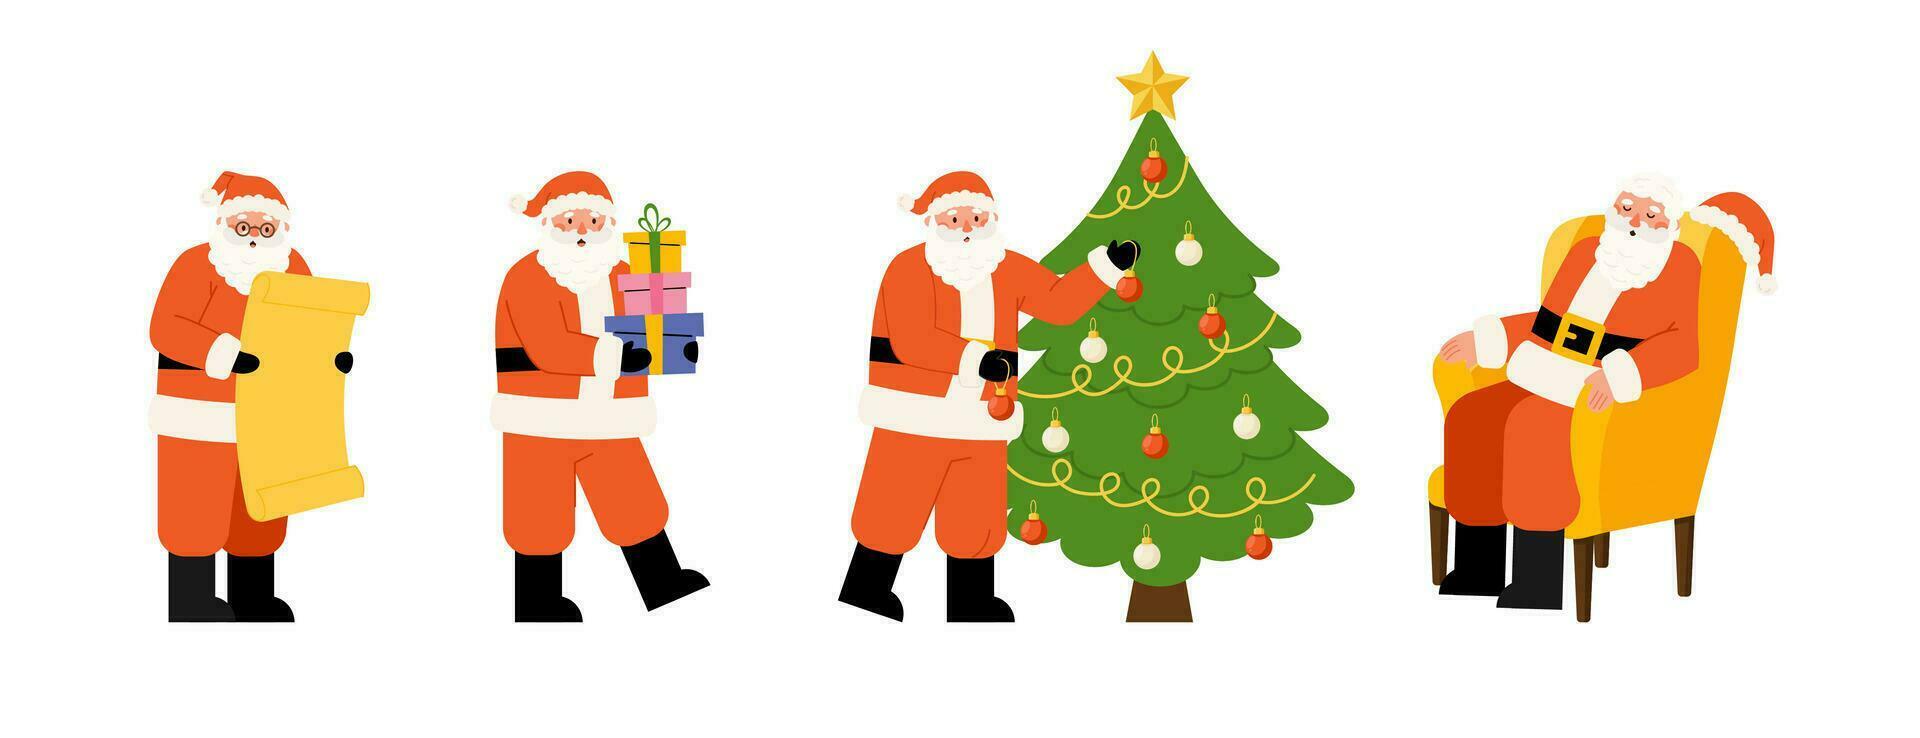 Set of Santa Clauses in different poses vector